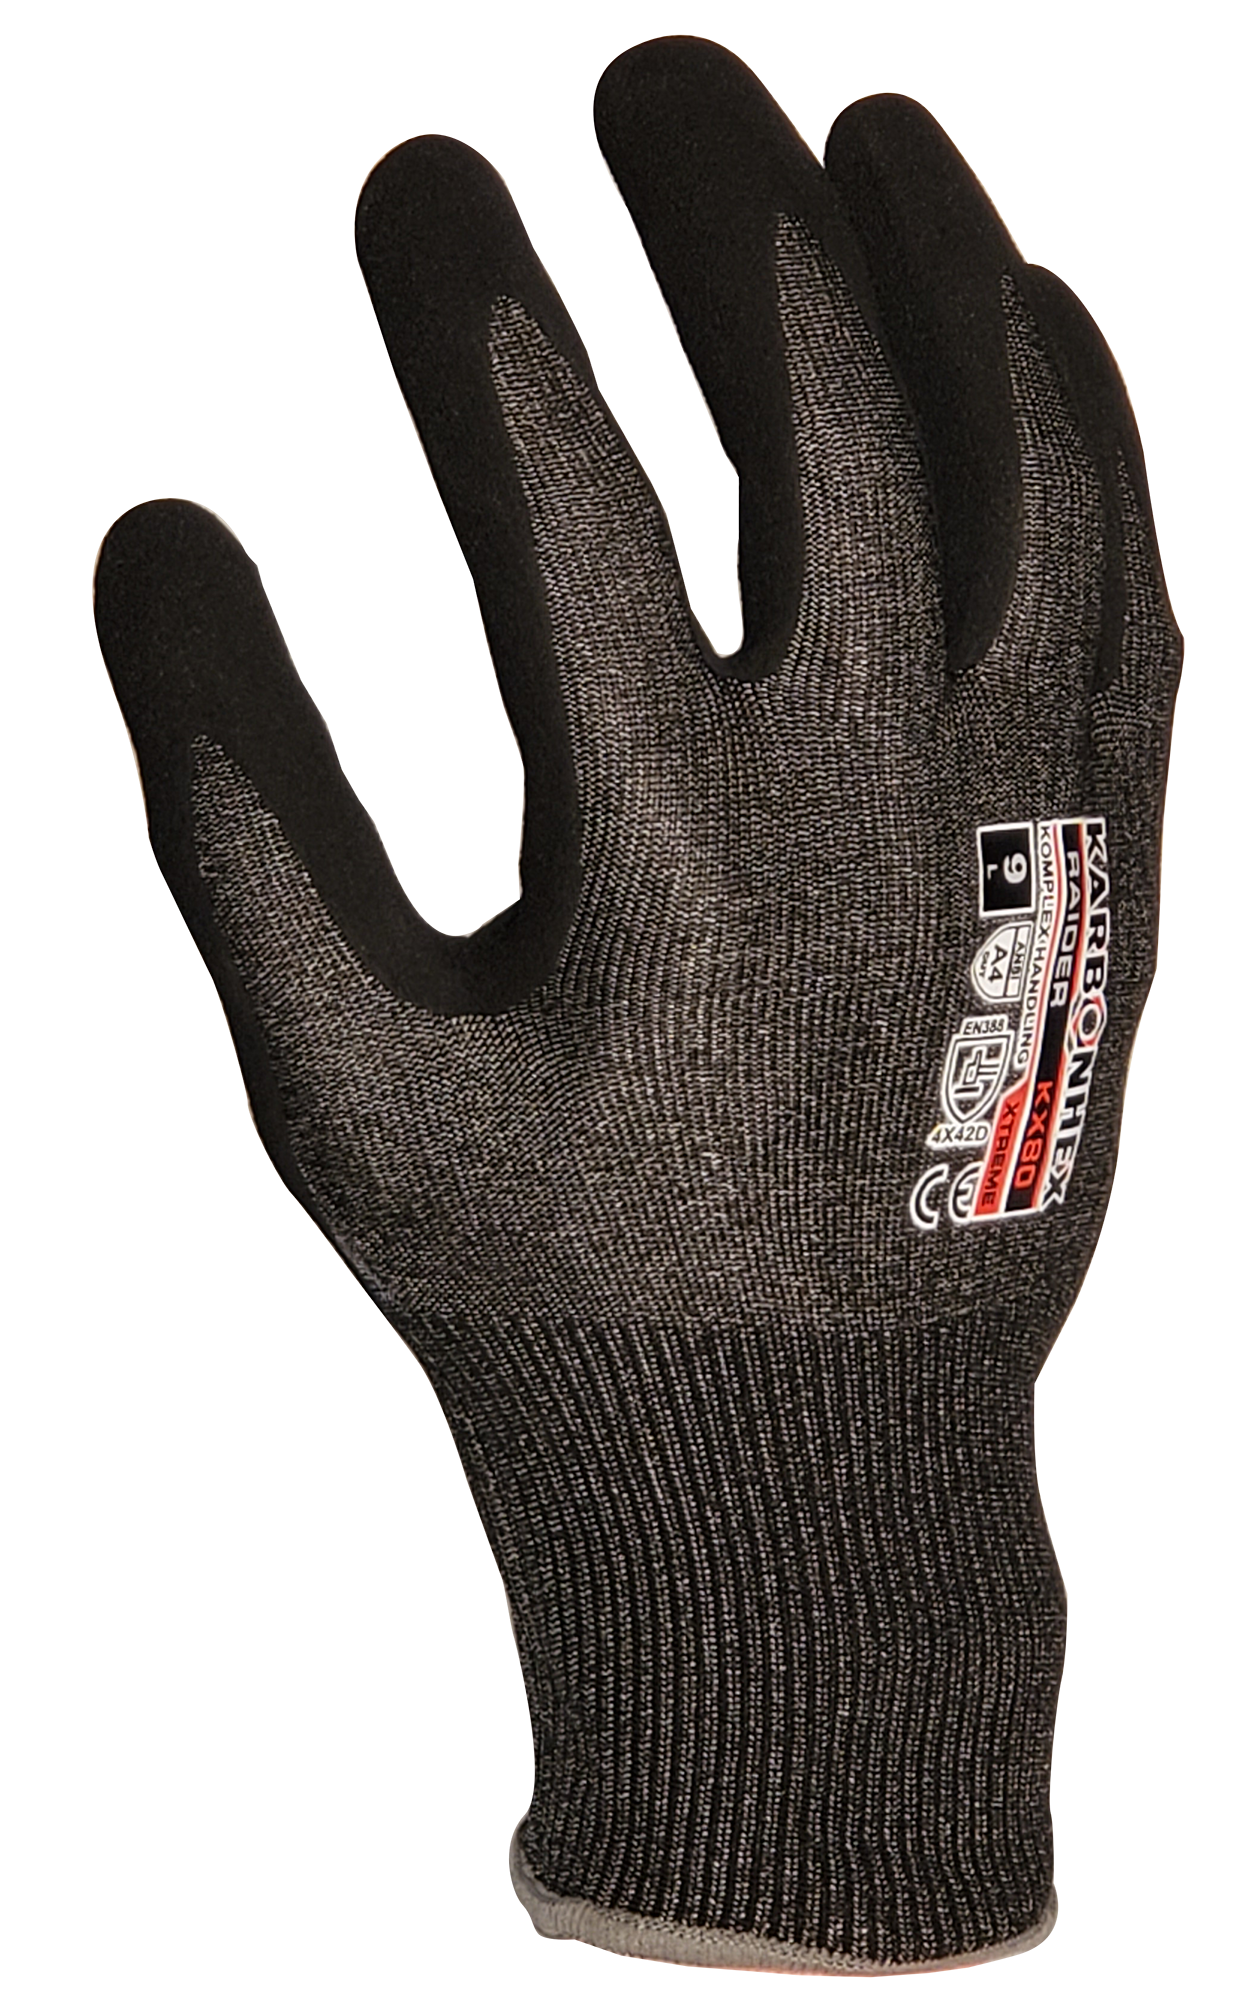 KarbonHex® KX80 by SW® Purpose Built Cut-Resistant Gloves with Oeko-Tex Safety Certification (12 Pairs Per Box)